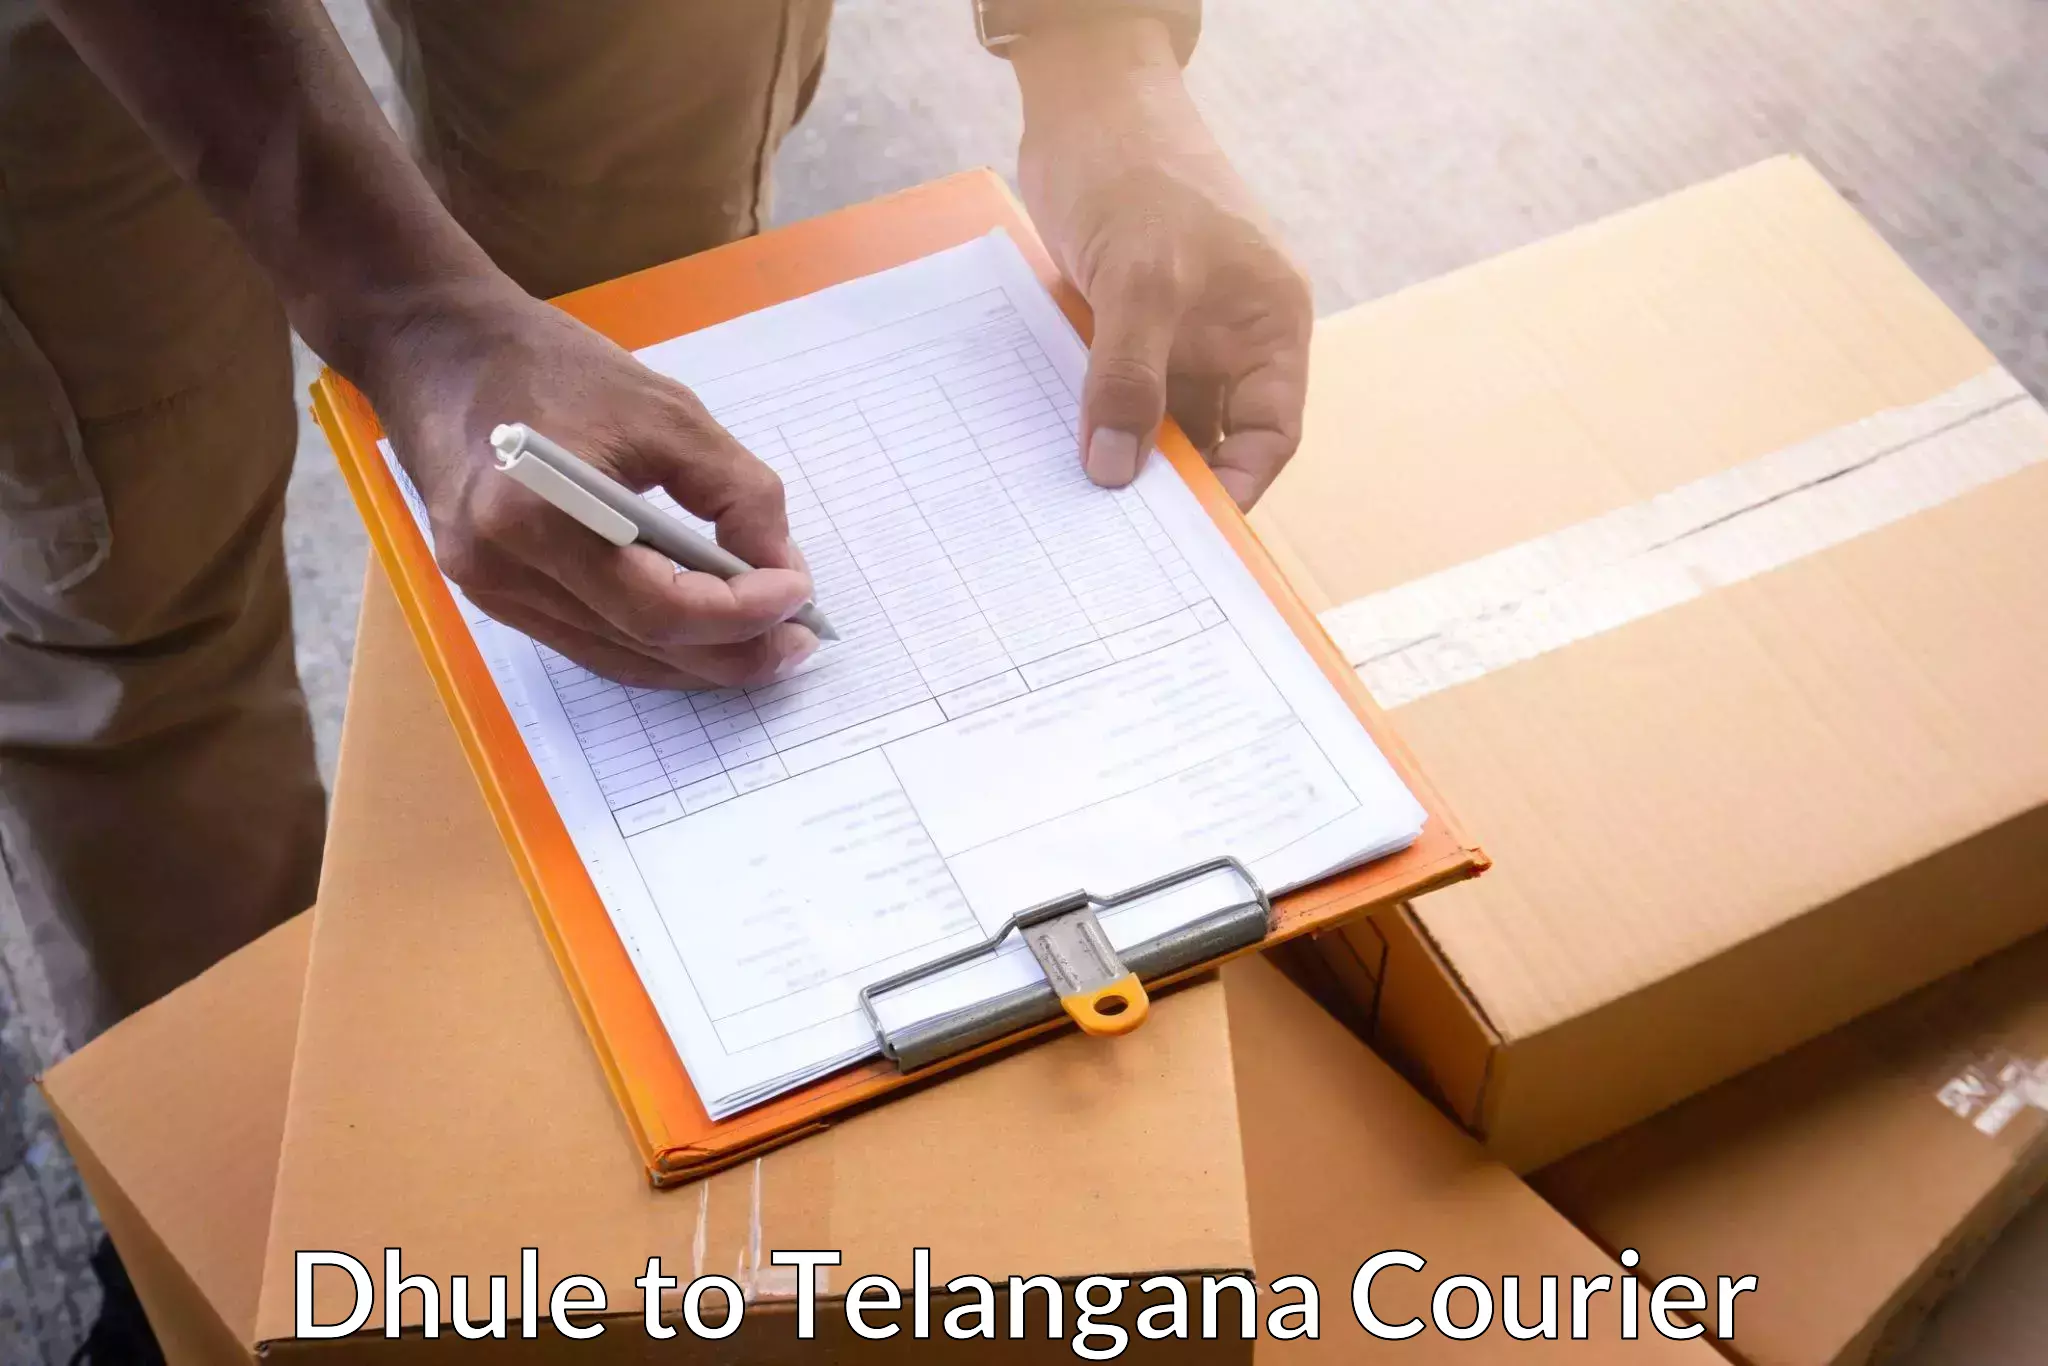 User-friendly delivery service Dhule to Suryapet